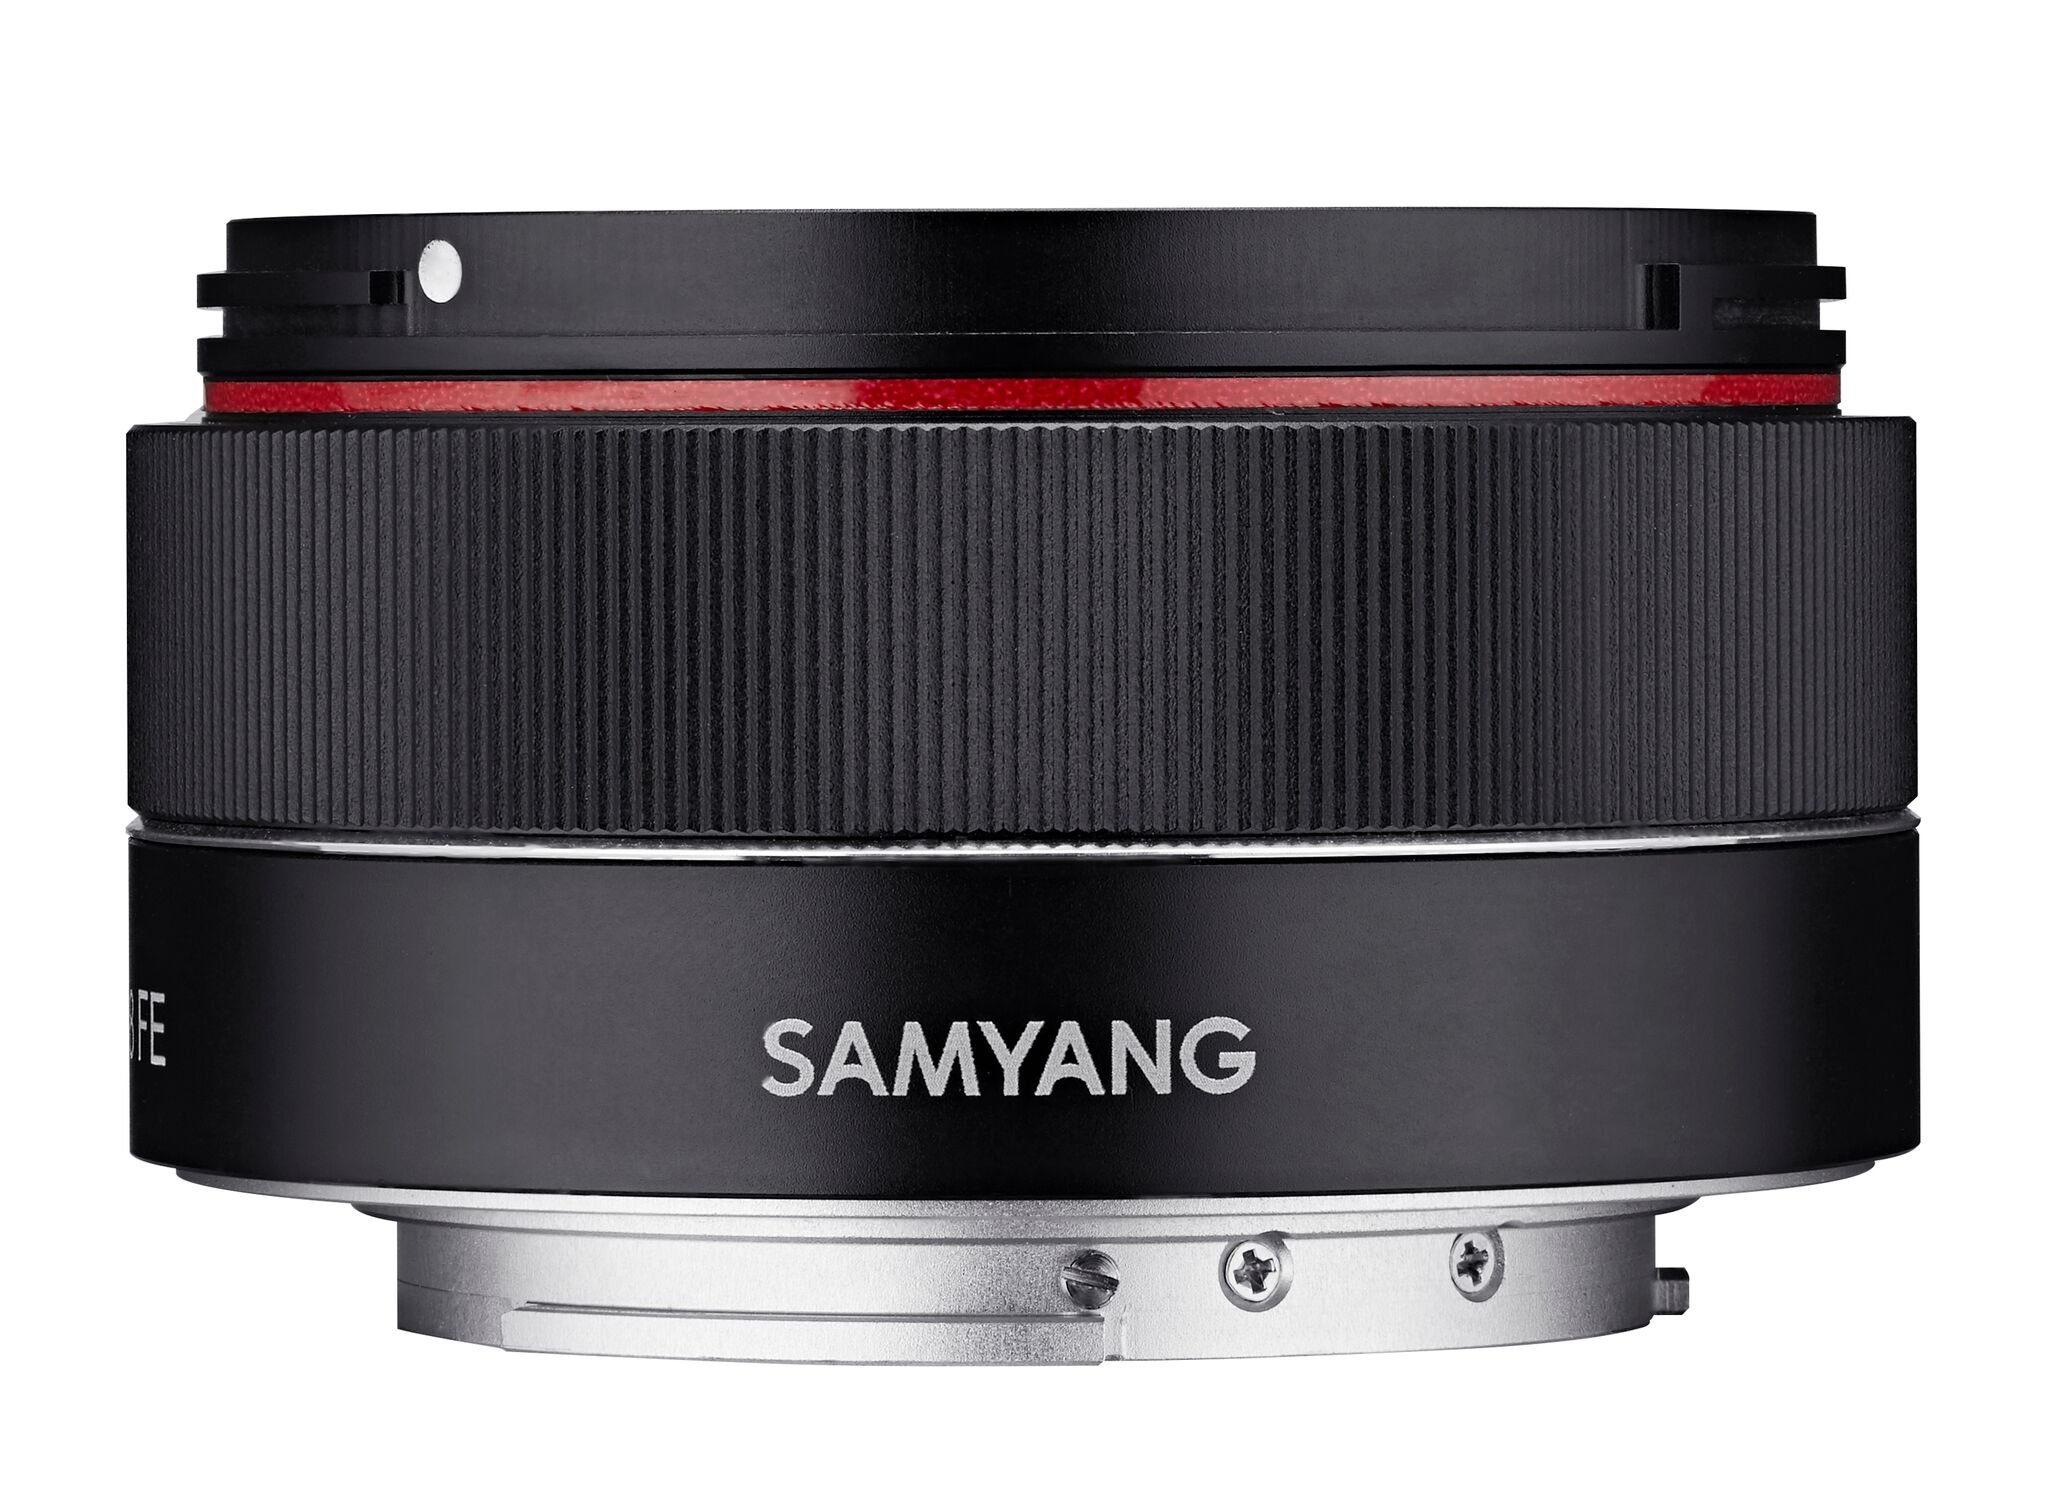 Samyang SYIO35AF-E 35mm f/2.8 Ultra Compact Wide Angle Lens for Sony E Mount Full Frame, Black